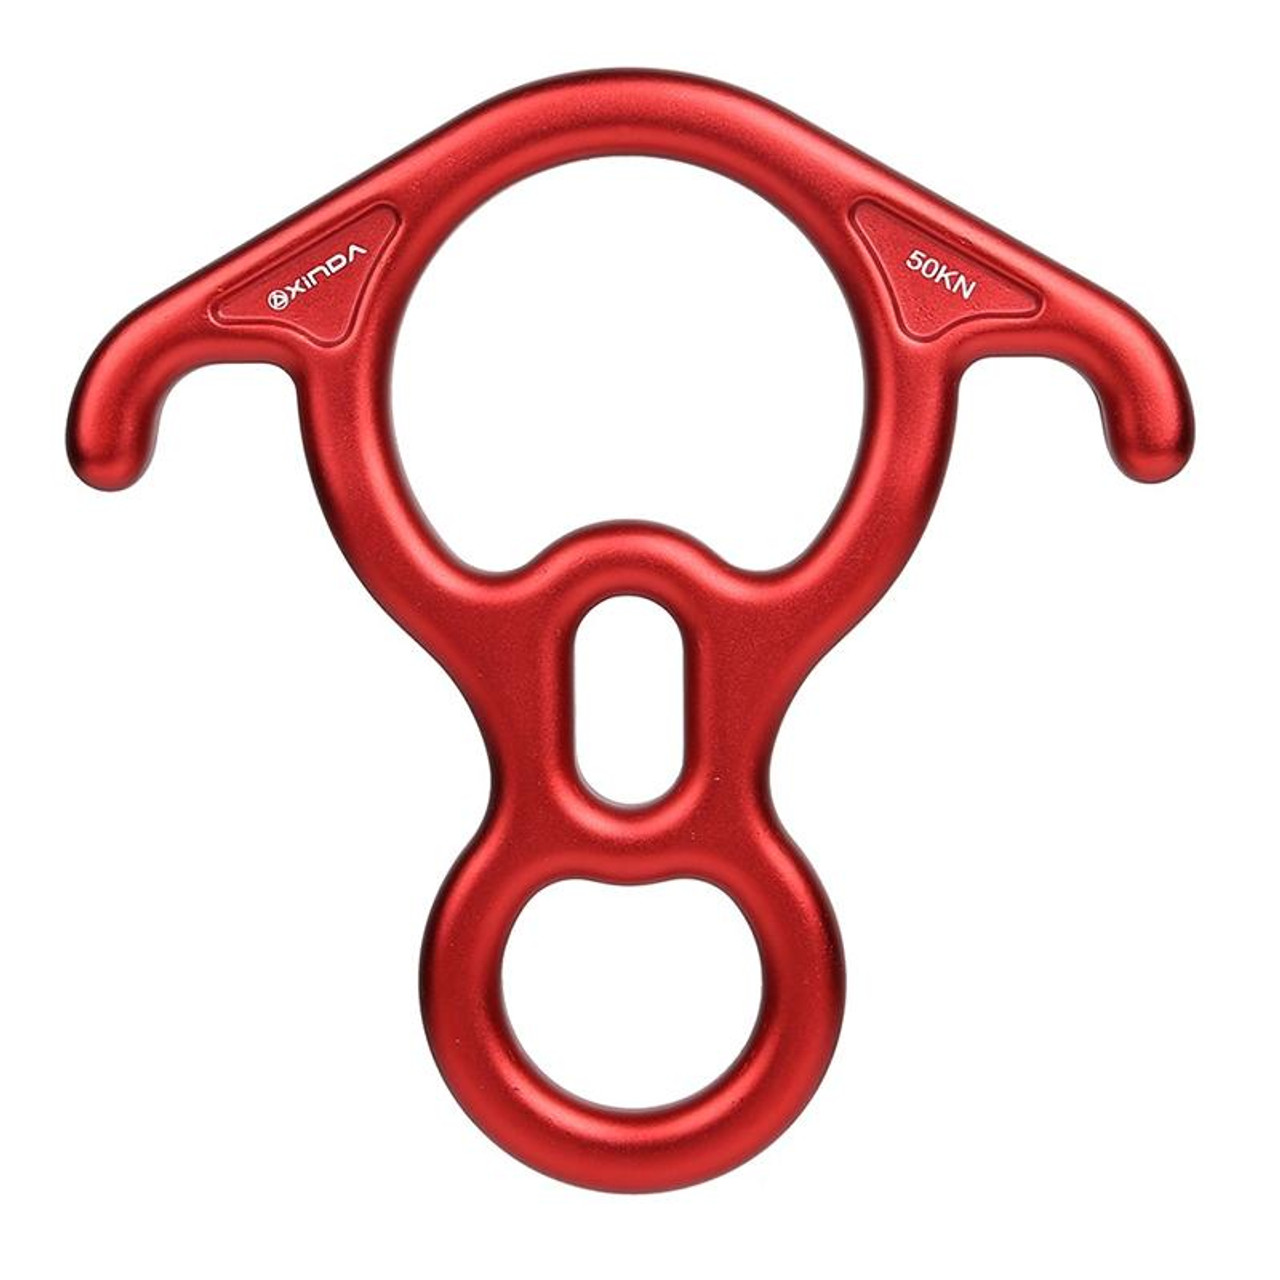 XINDA XD8602 Climbing Rescue Figure 8 Descender with Bent-ear Rappelling  Gear Belay Device(Red), snatcher